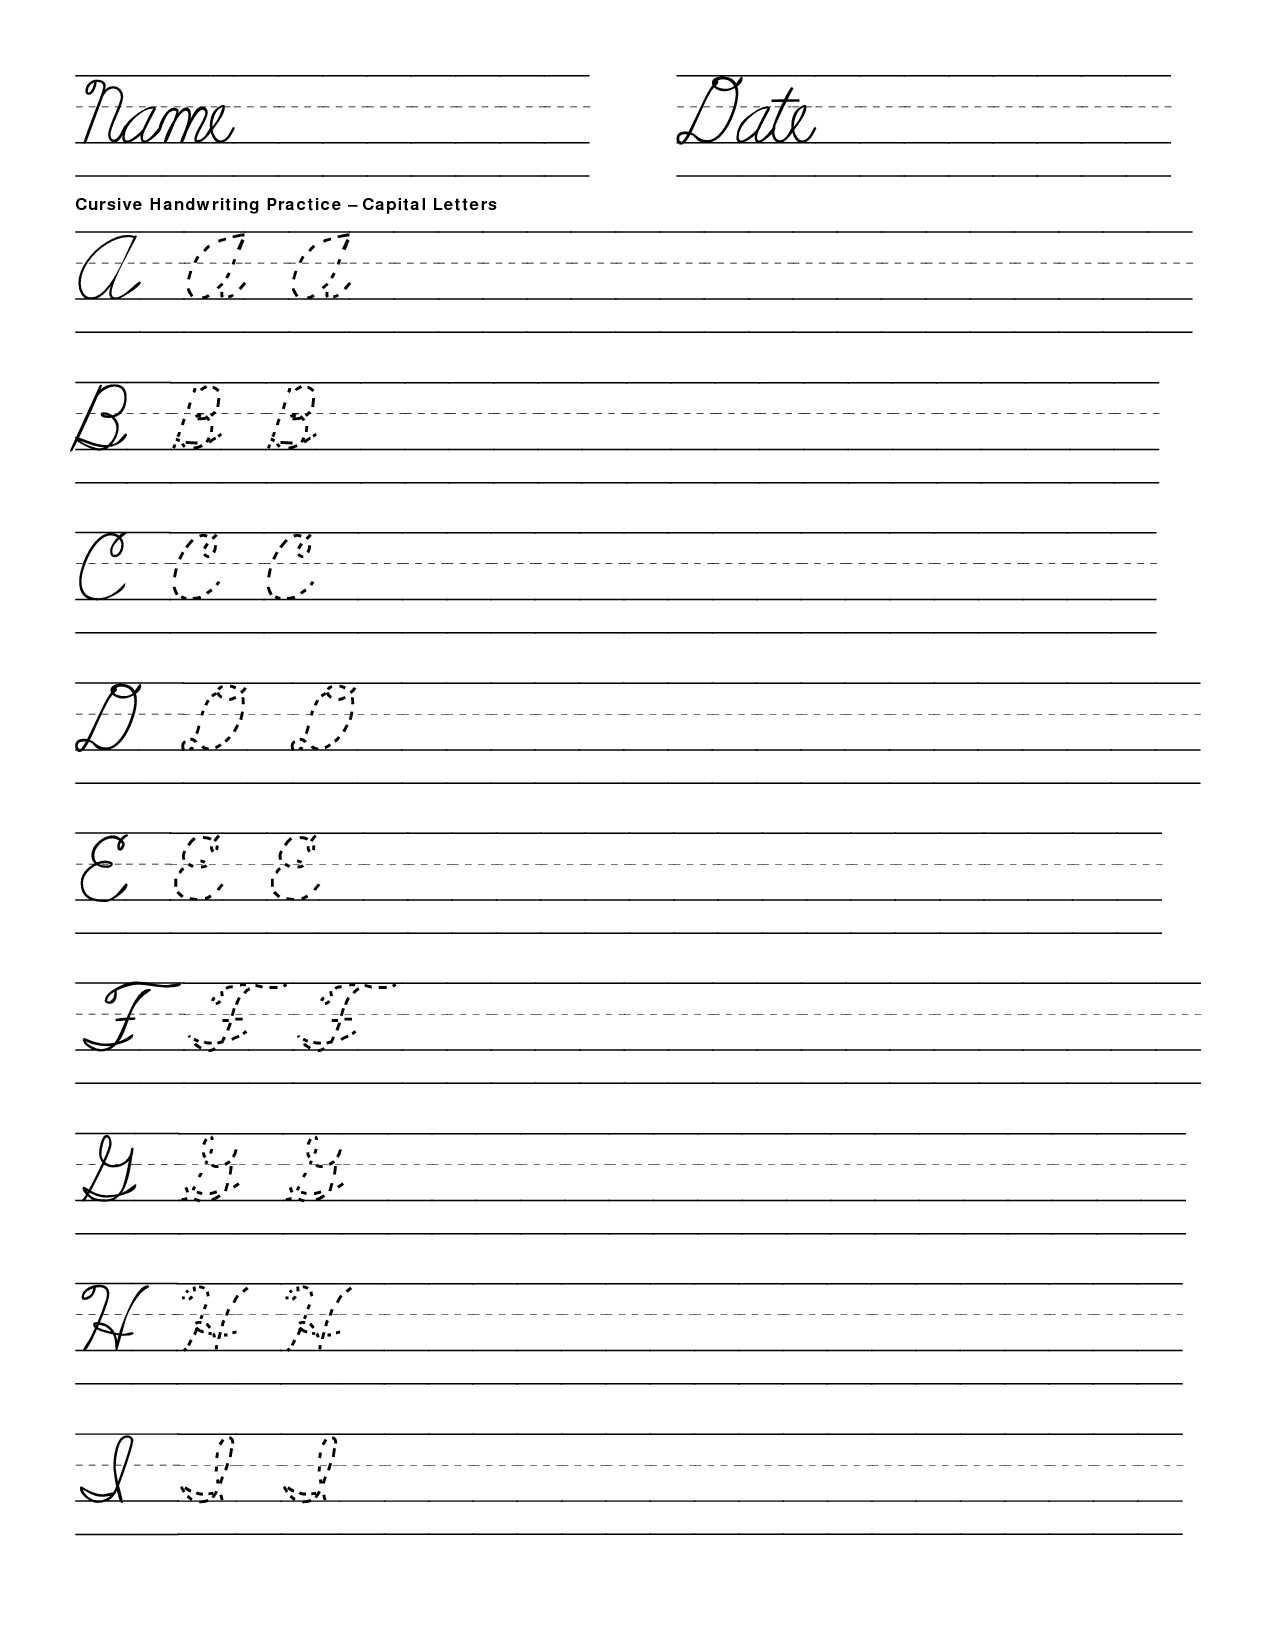 Learning Letters and Numbers Worksheets as Well as Uppercase Letter Templates Free New Cursive Alphabet Worksheets Free